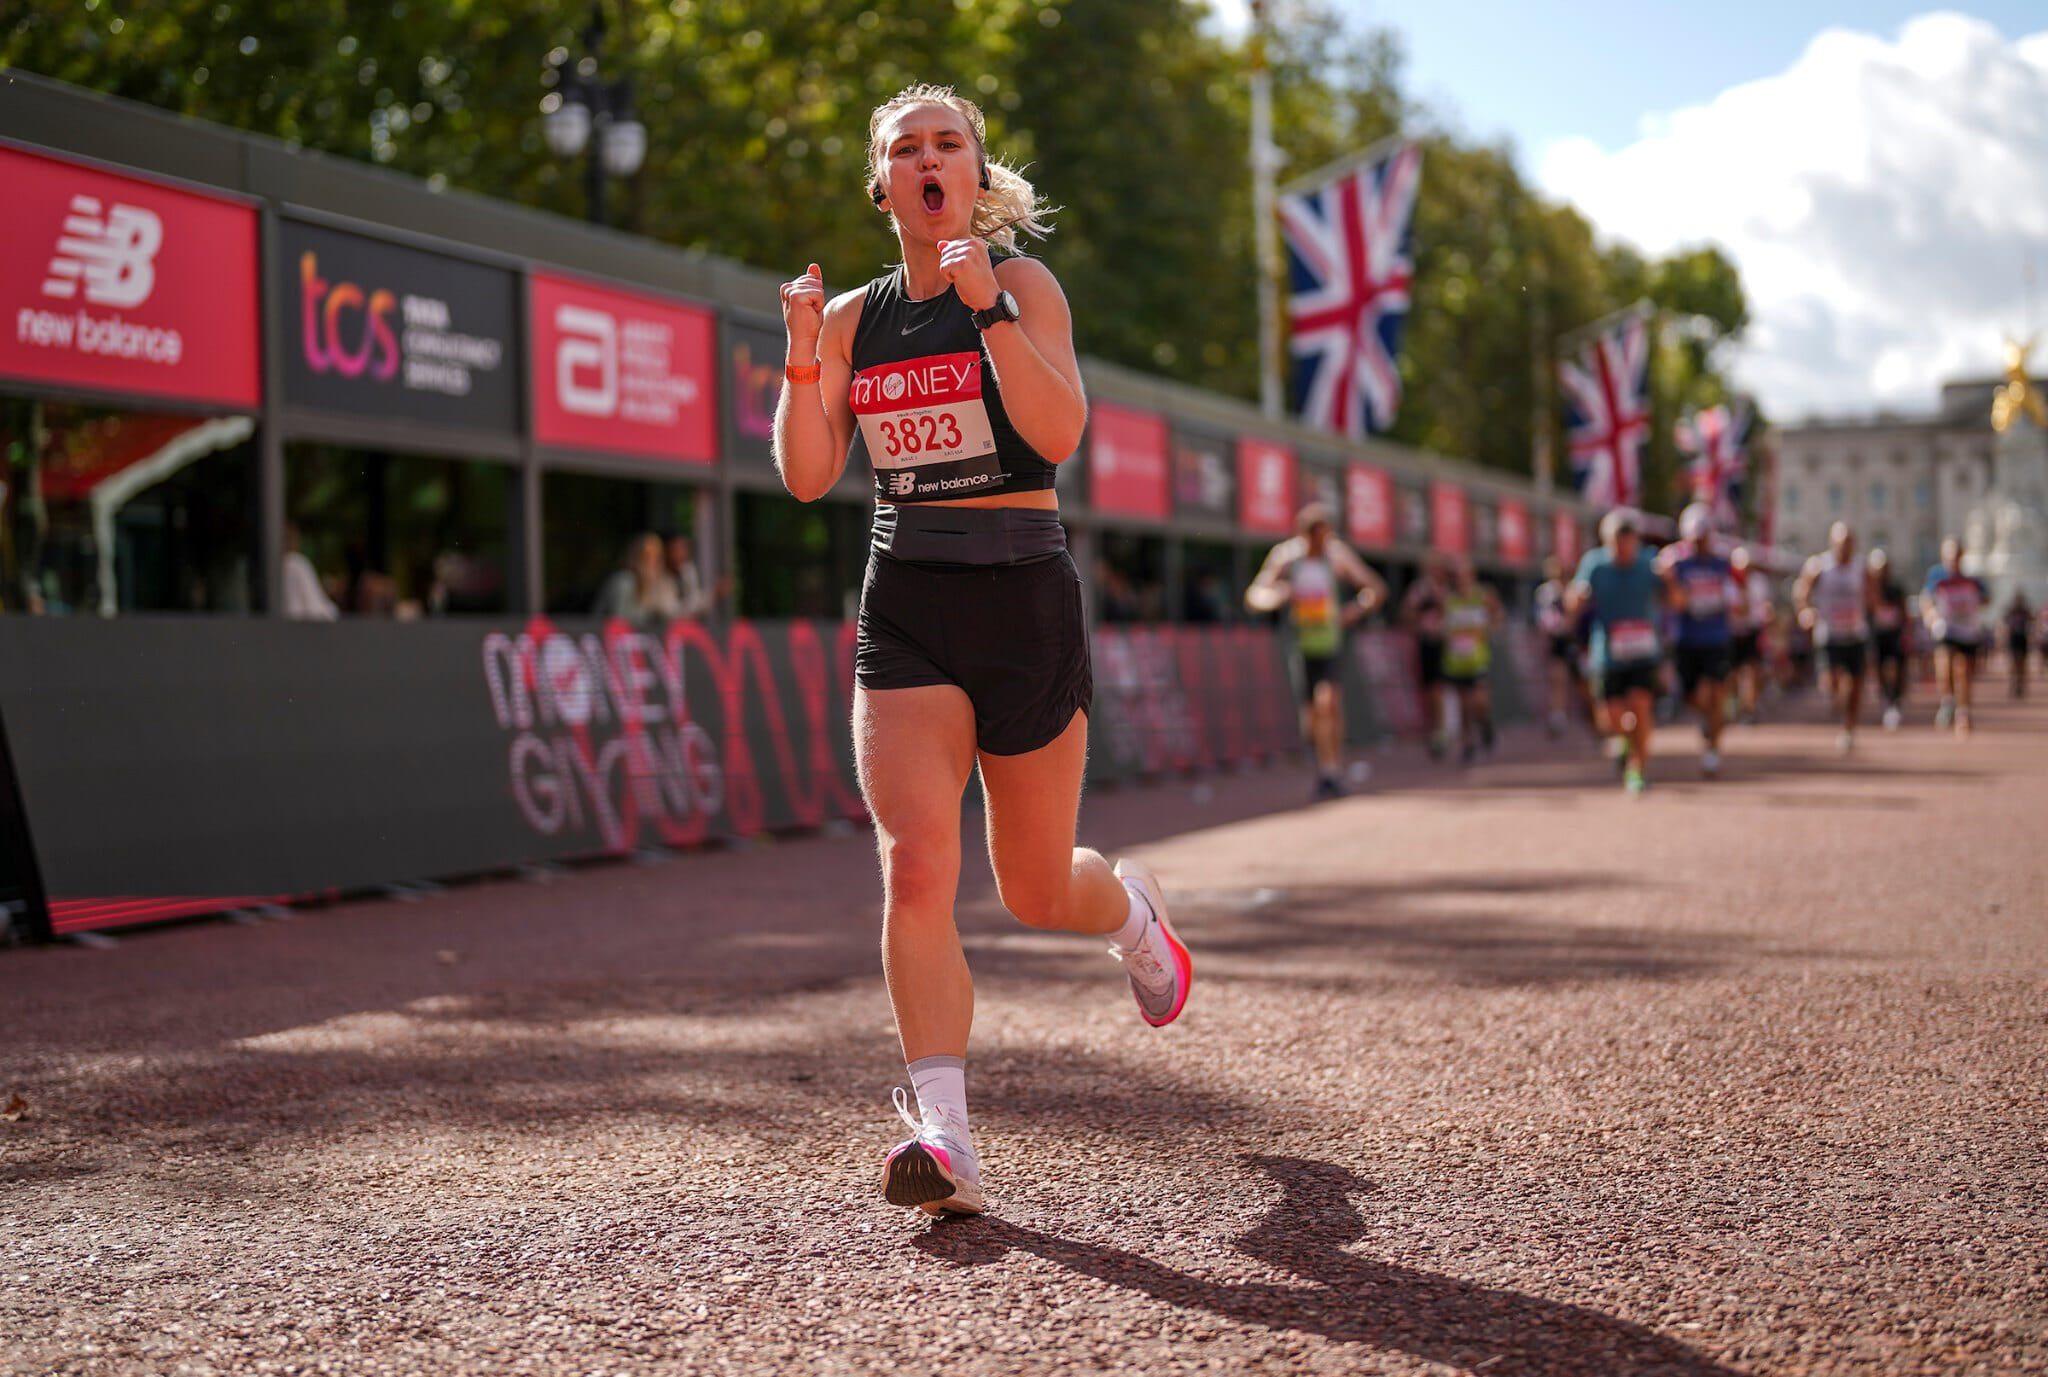 Running the London Marathon is an unforgettable experience